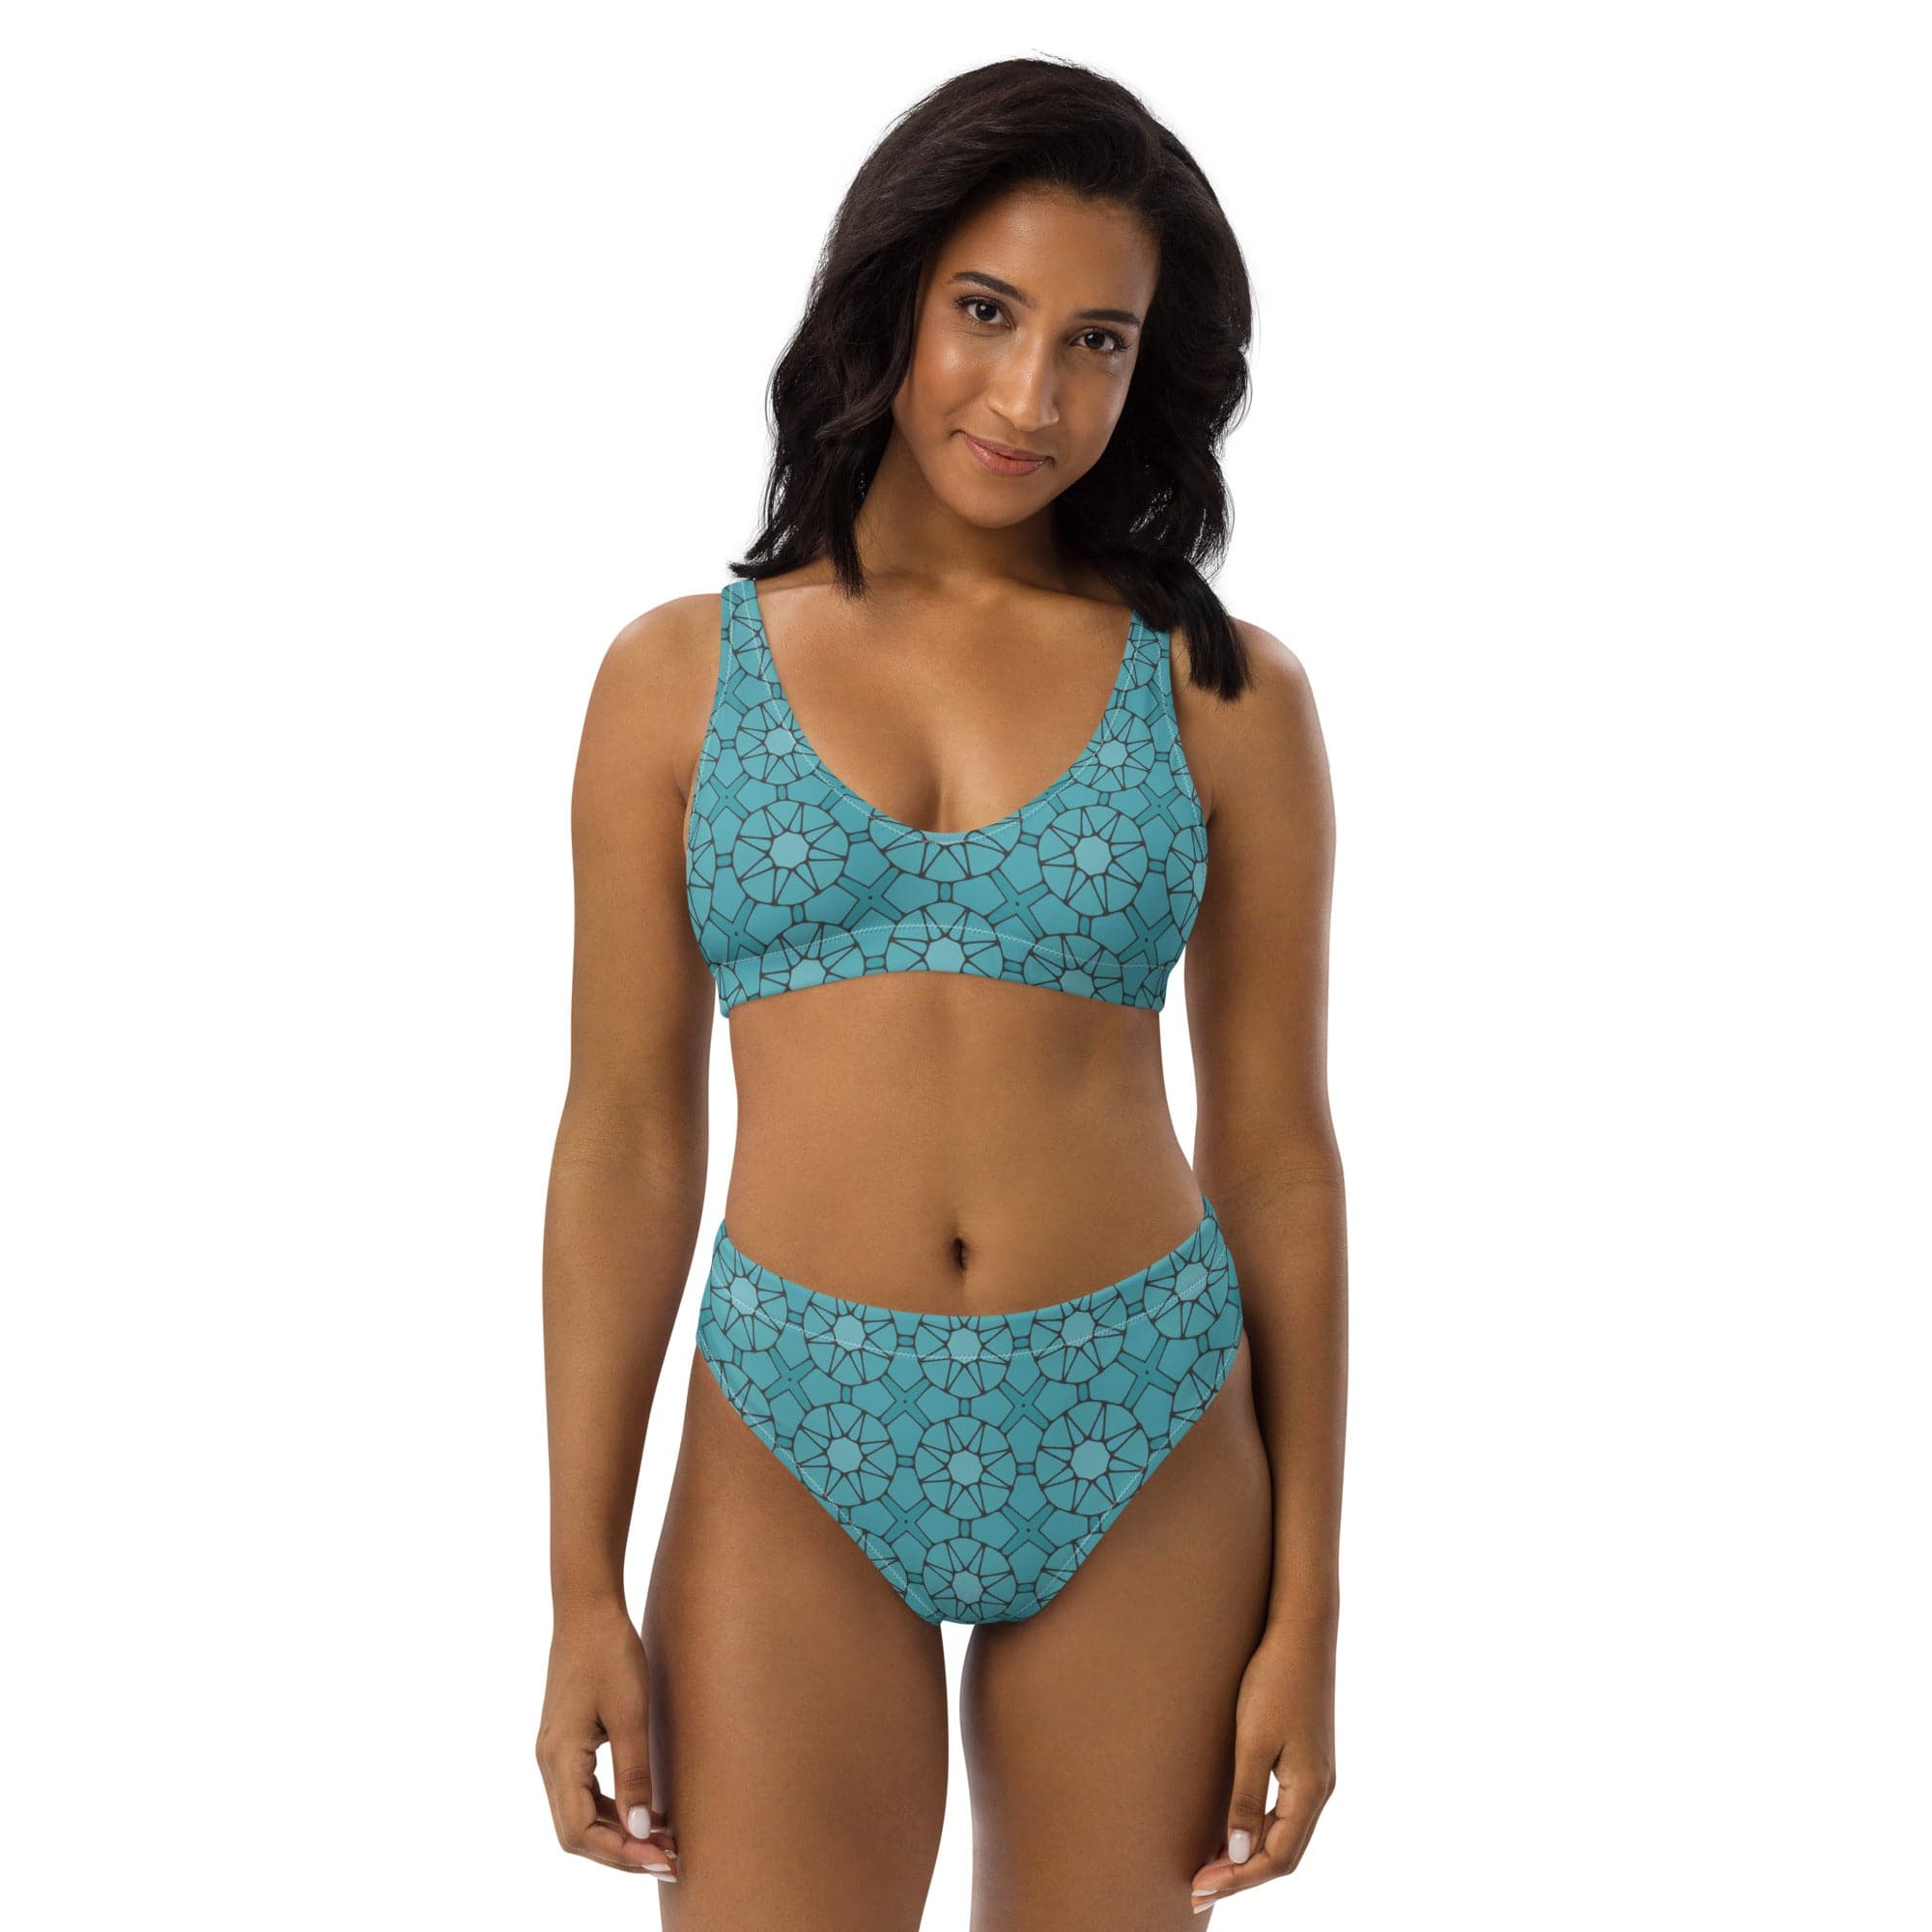 Green starry patterned Recycled high-waisted bikini, by Sensus Studio Design